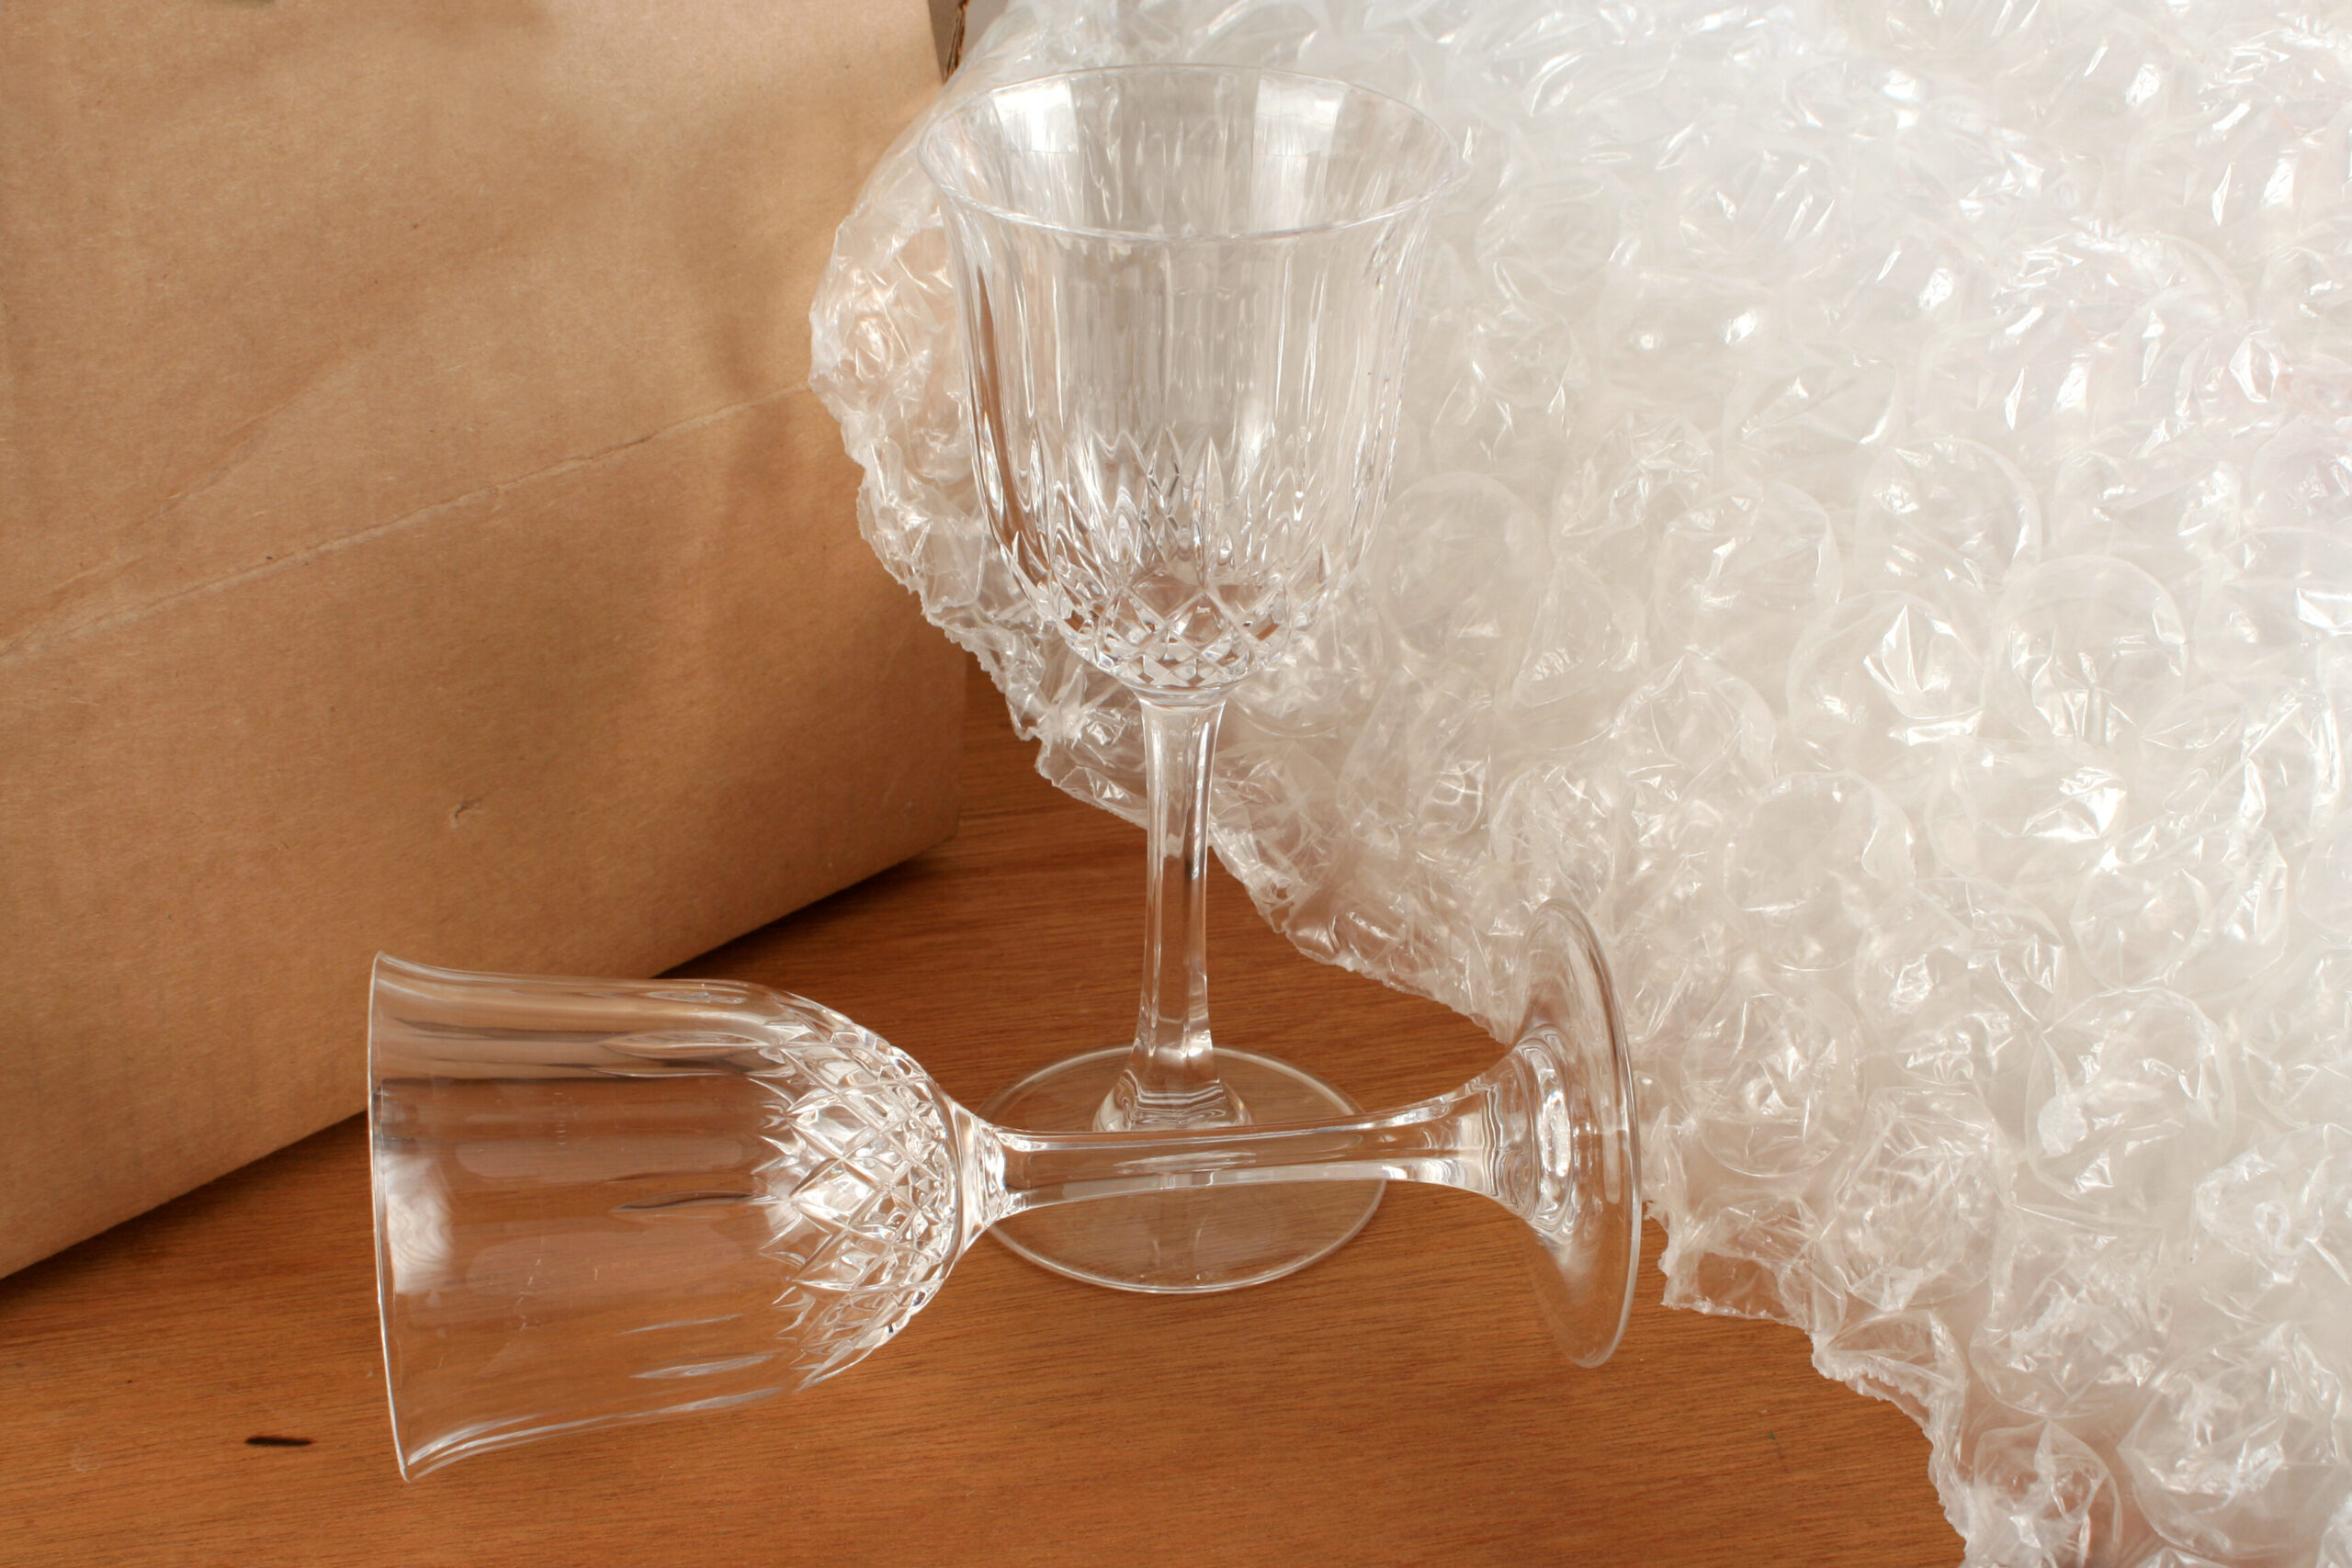 4 Mistakes to Avoid When Packing Your Valuable Glassware